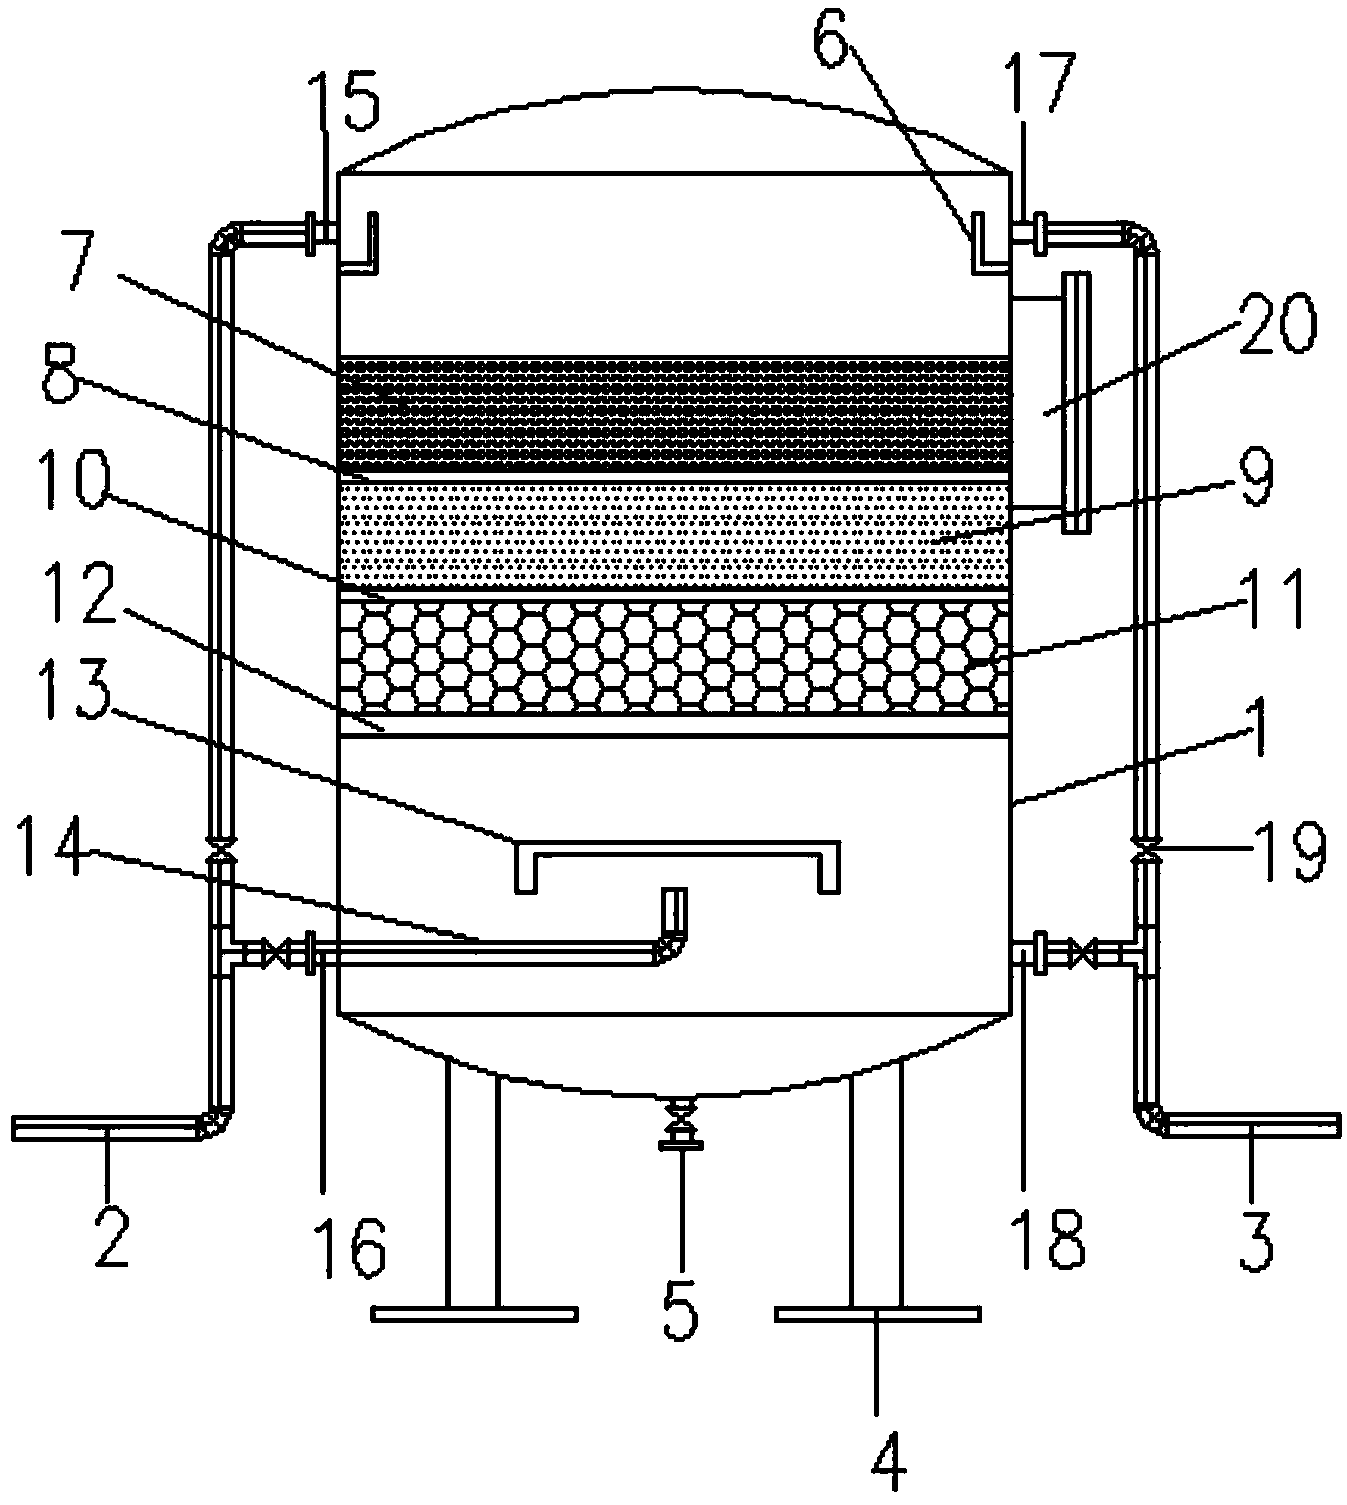 Multilayered filtering equipment with backwashing device